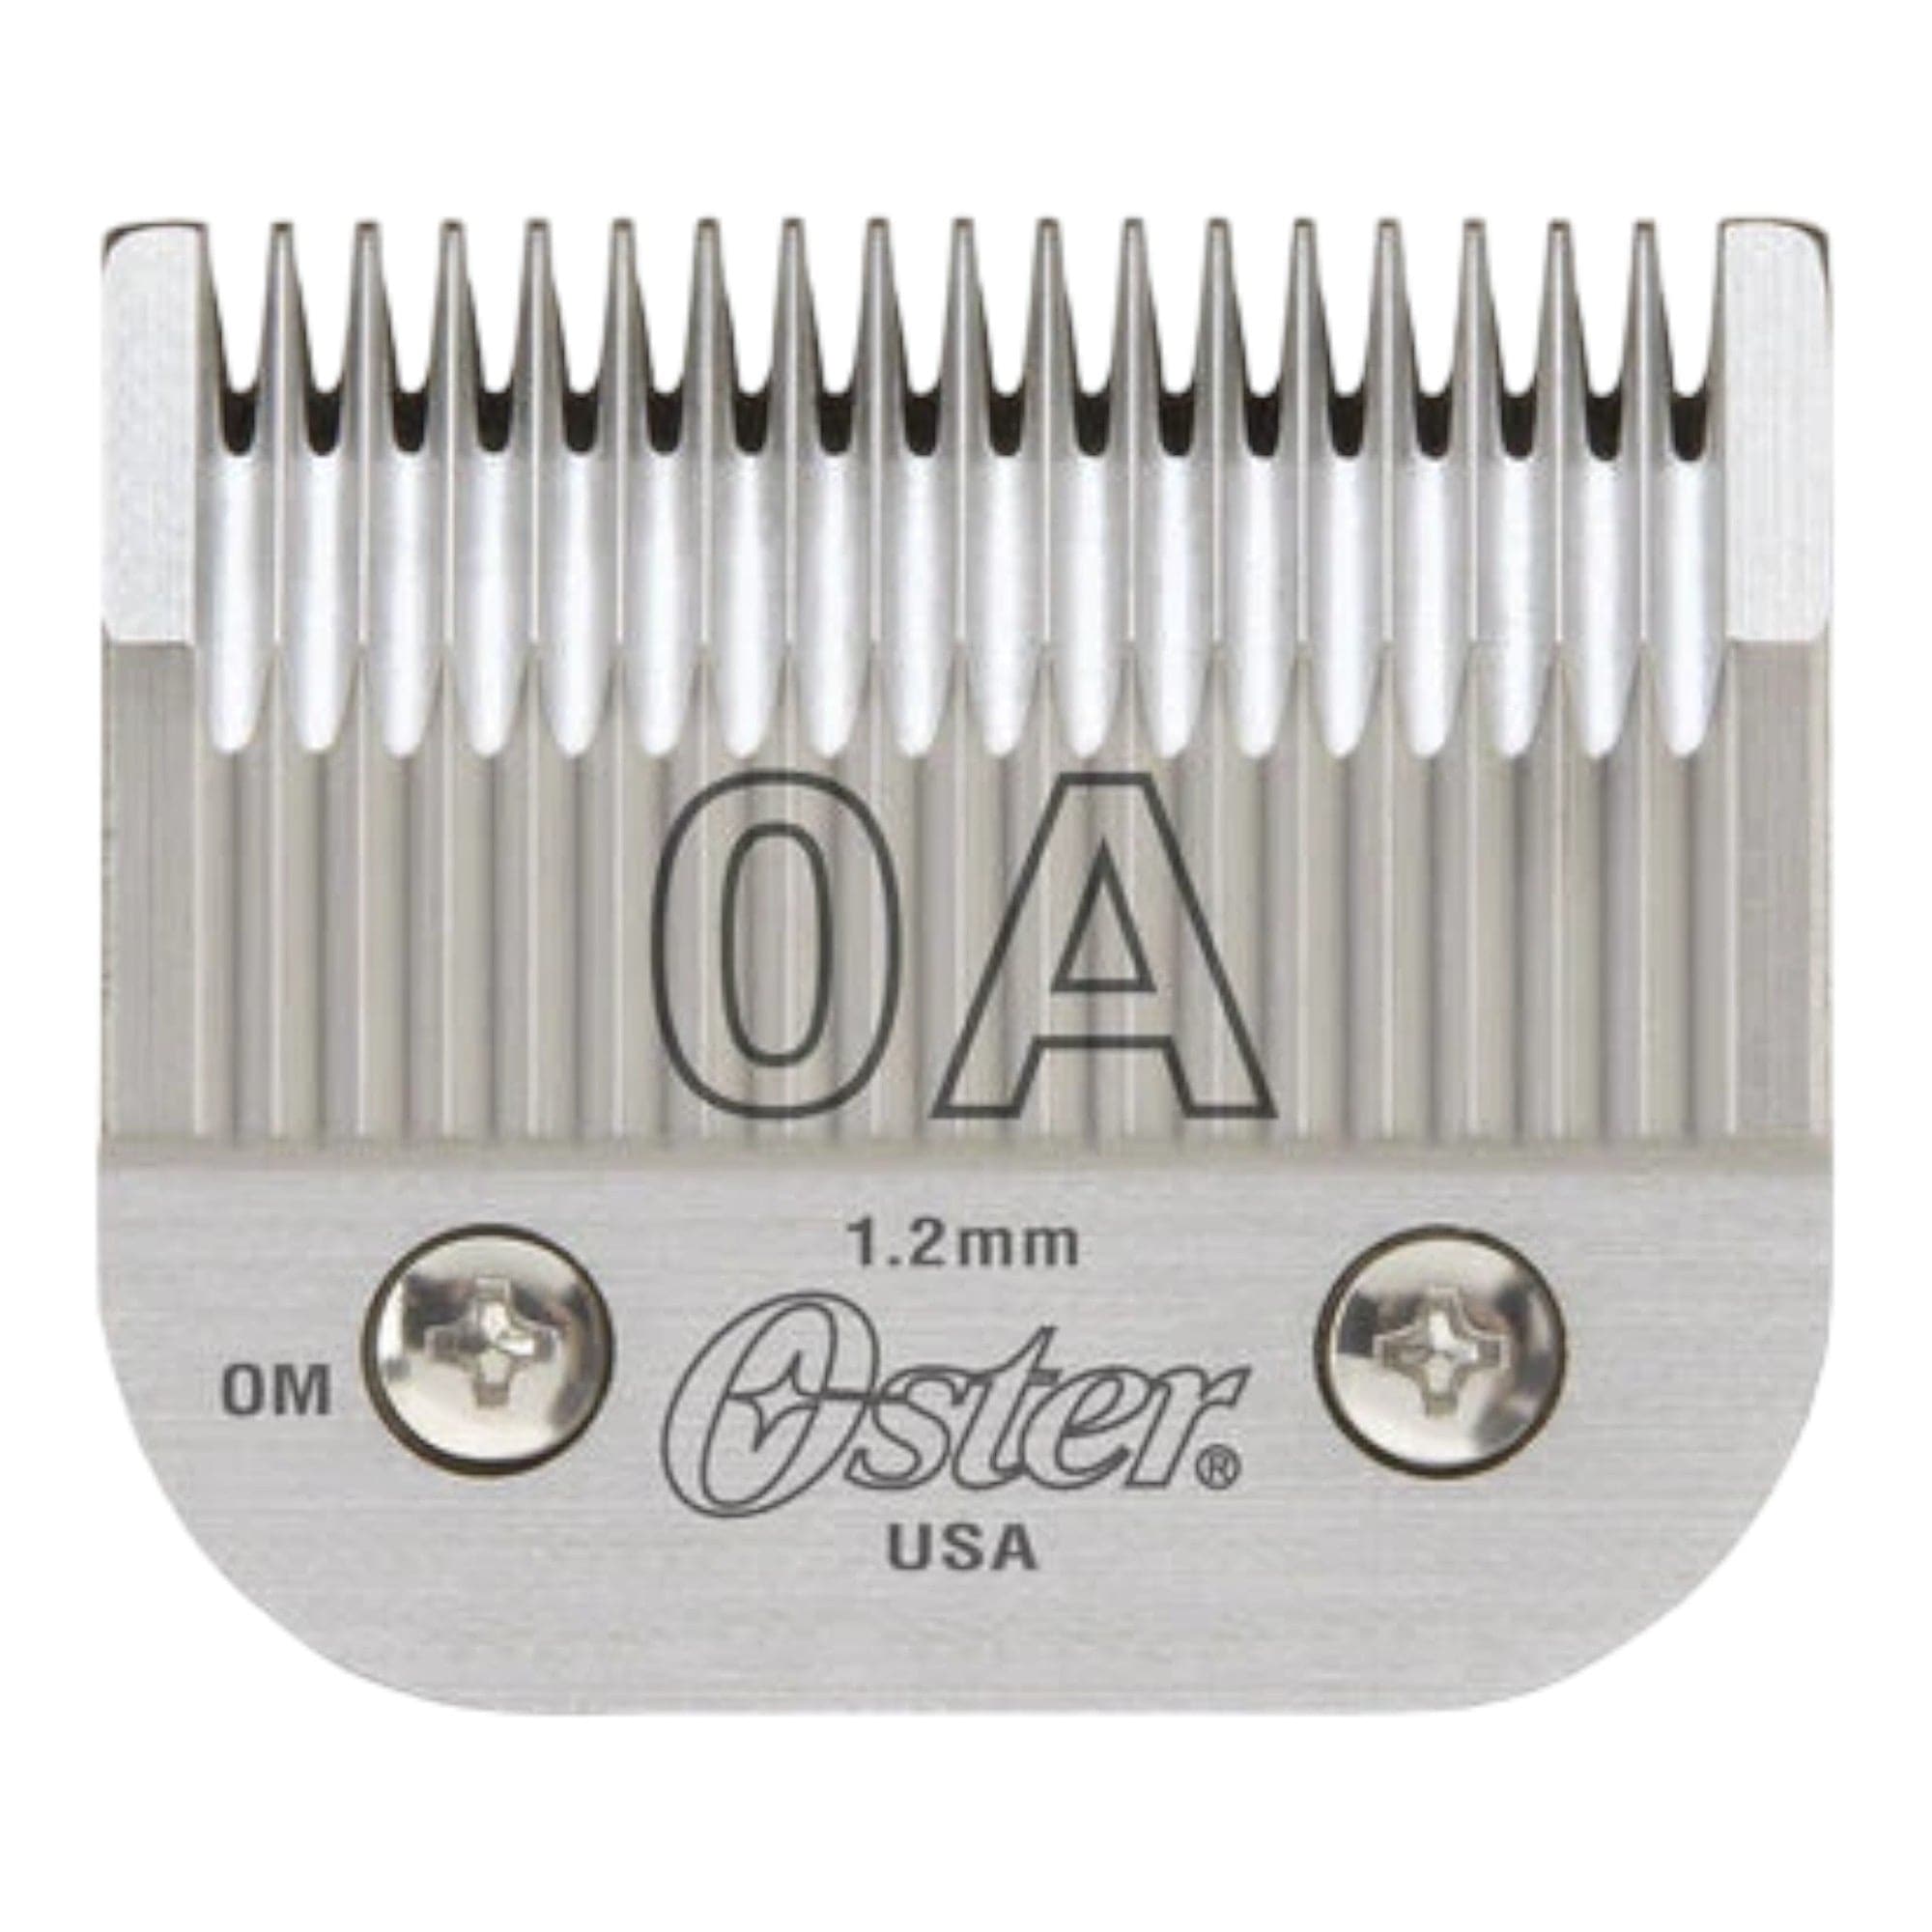 Oster - Detachable Blade Size 0A - 1.2mm 076918-056